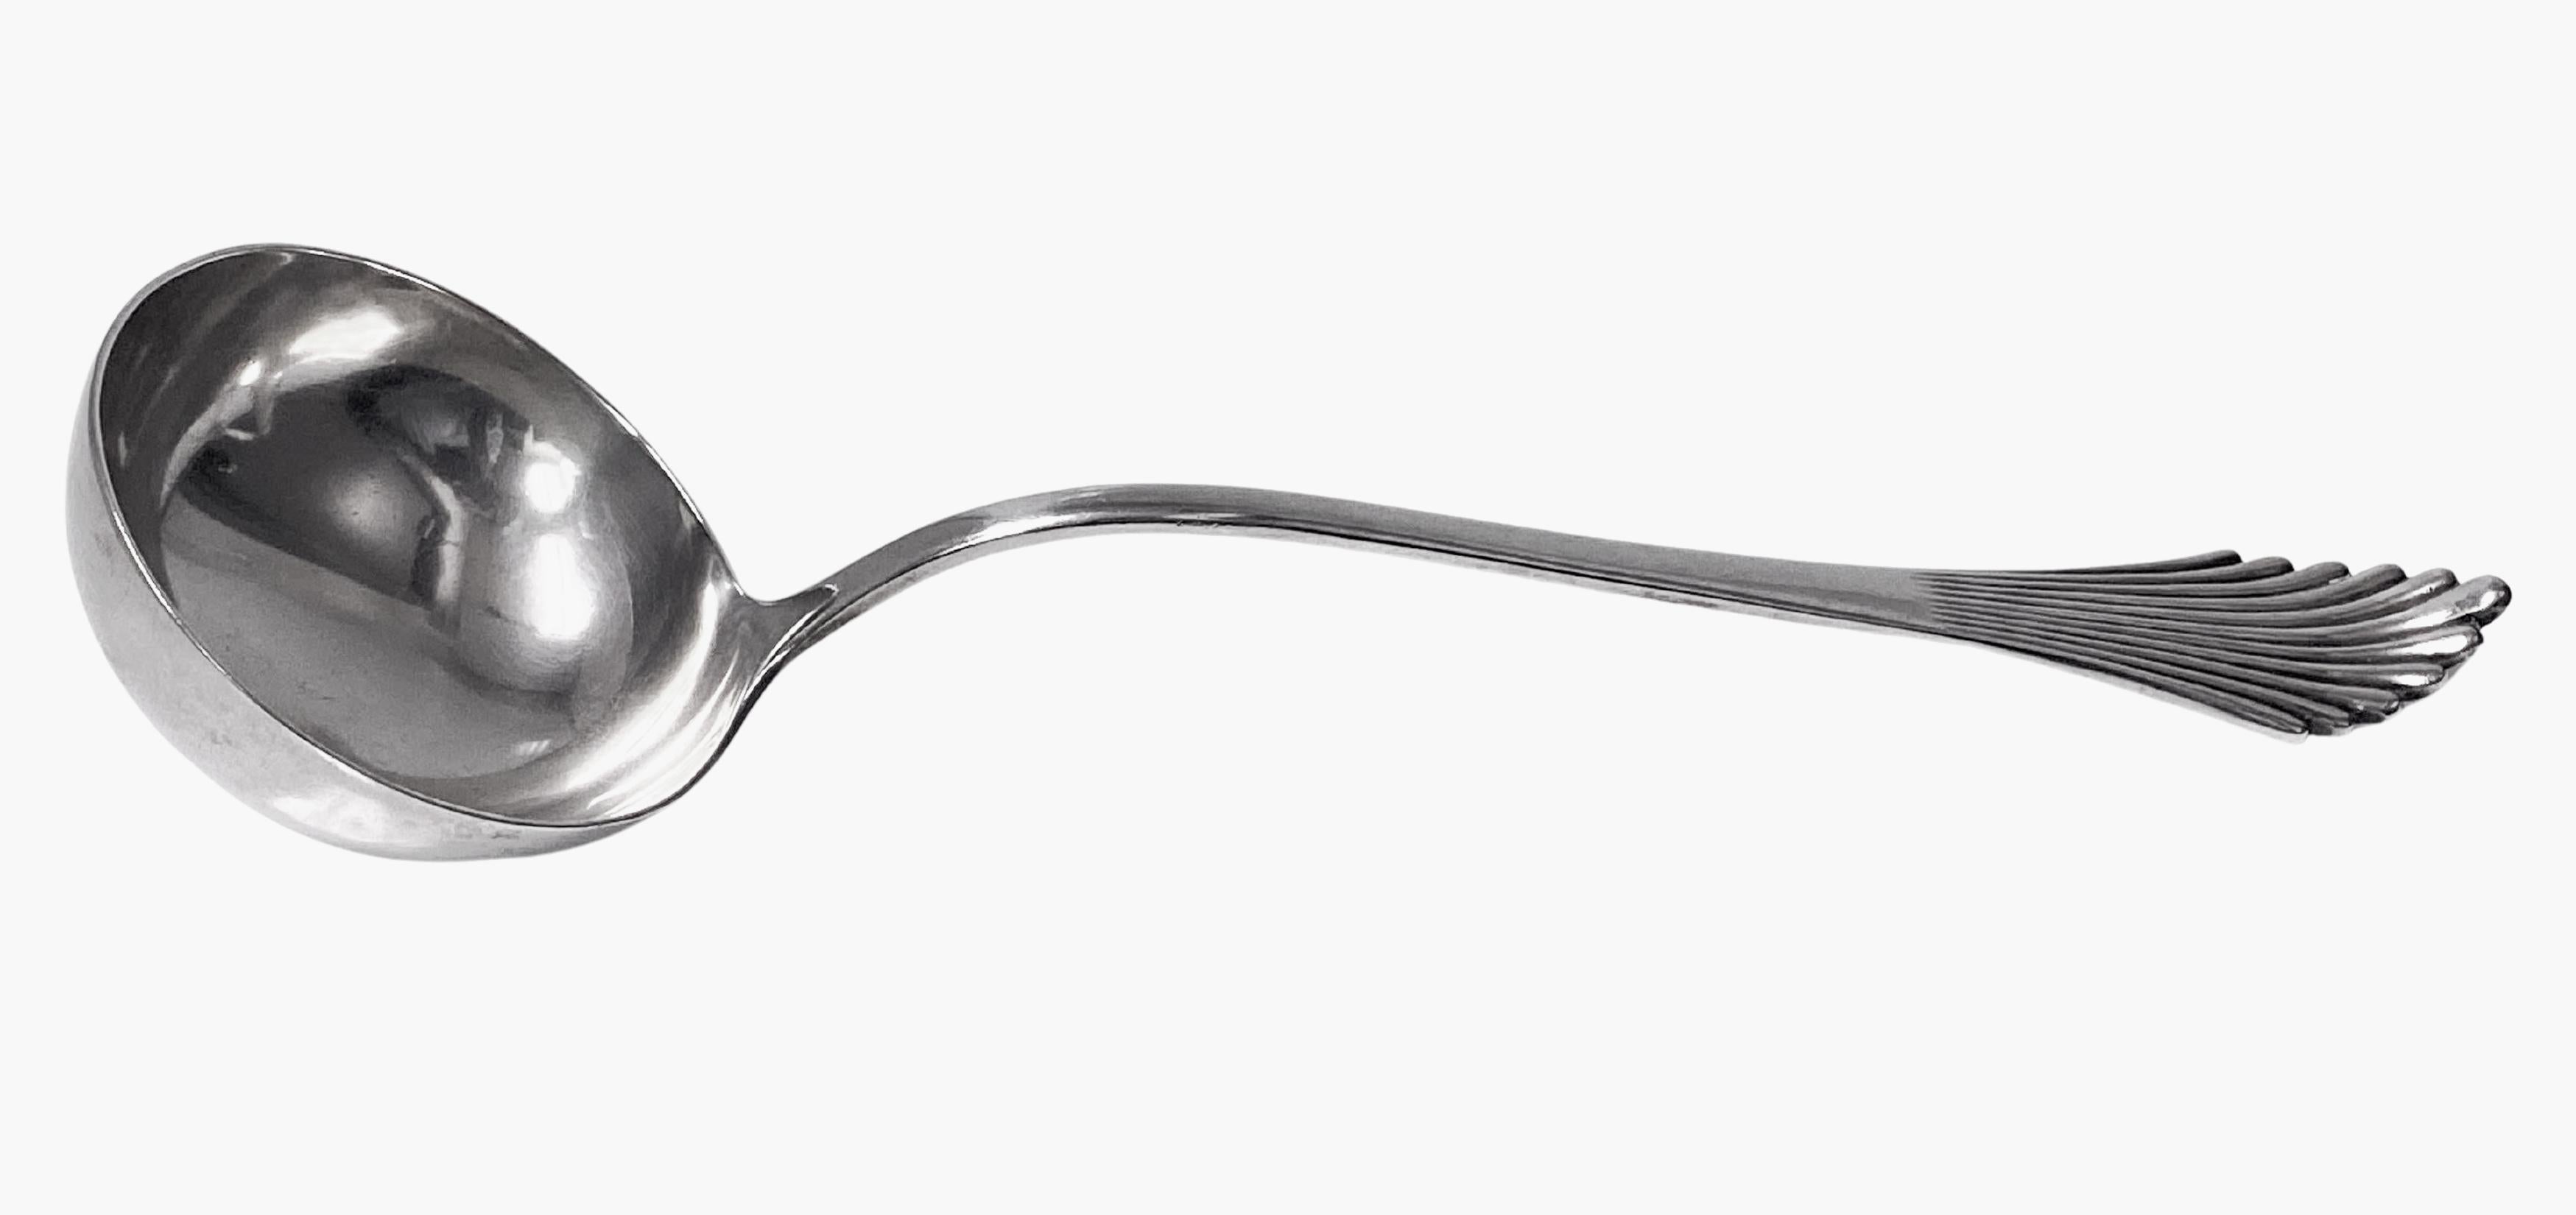 Antique Dutch Silver Soup Ladle Gerritsen Utrecht 1916. Tapered ribbed fan design handle. Full hallmarks and hook to reverse. Length: 12.5 inches. Weight: 8 oz. Condition: Good. Reflections from photography only